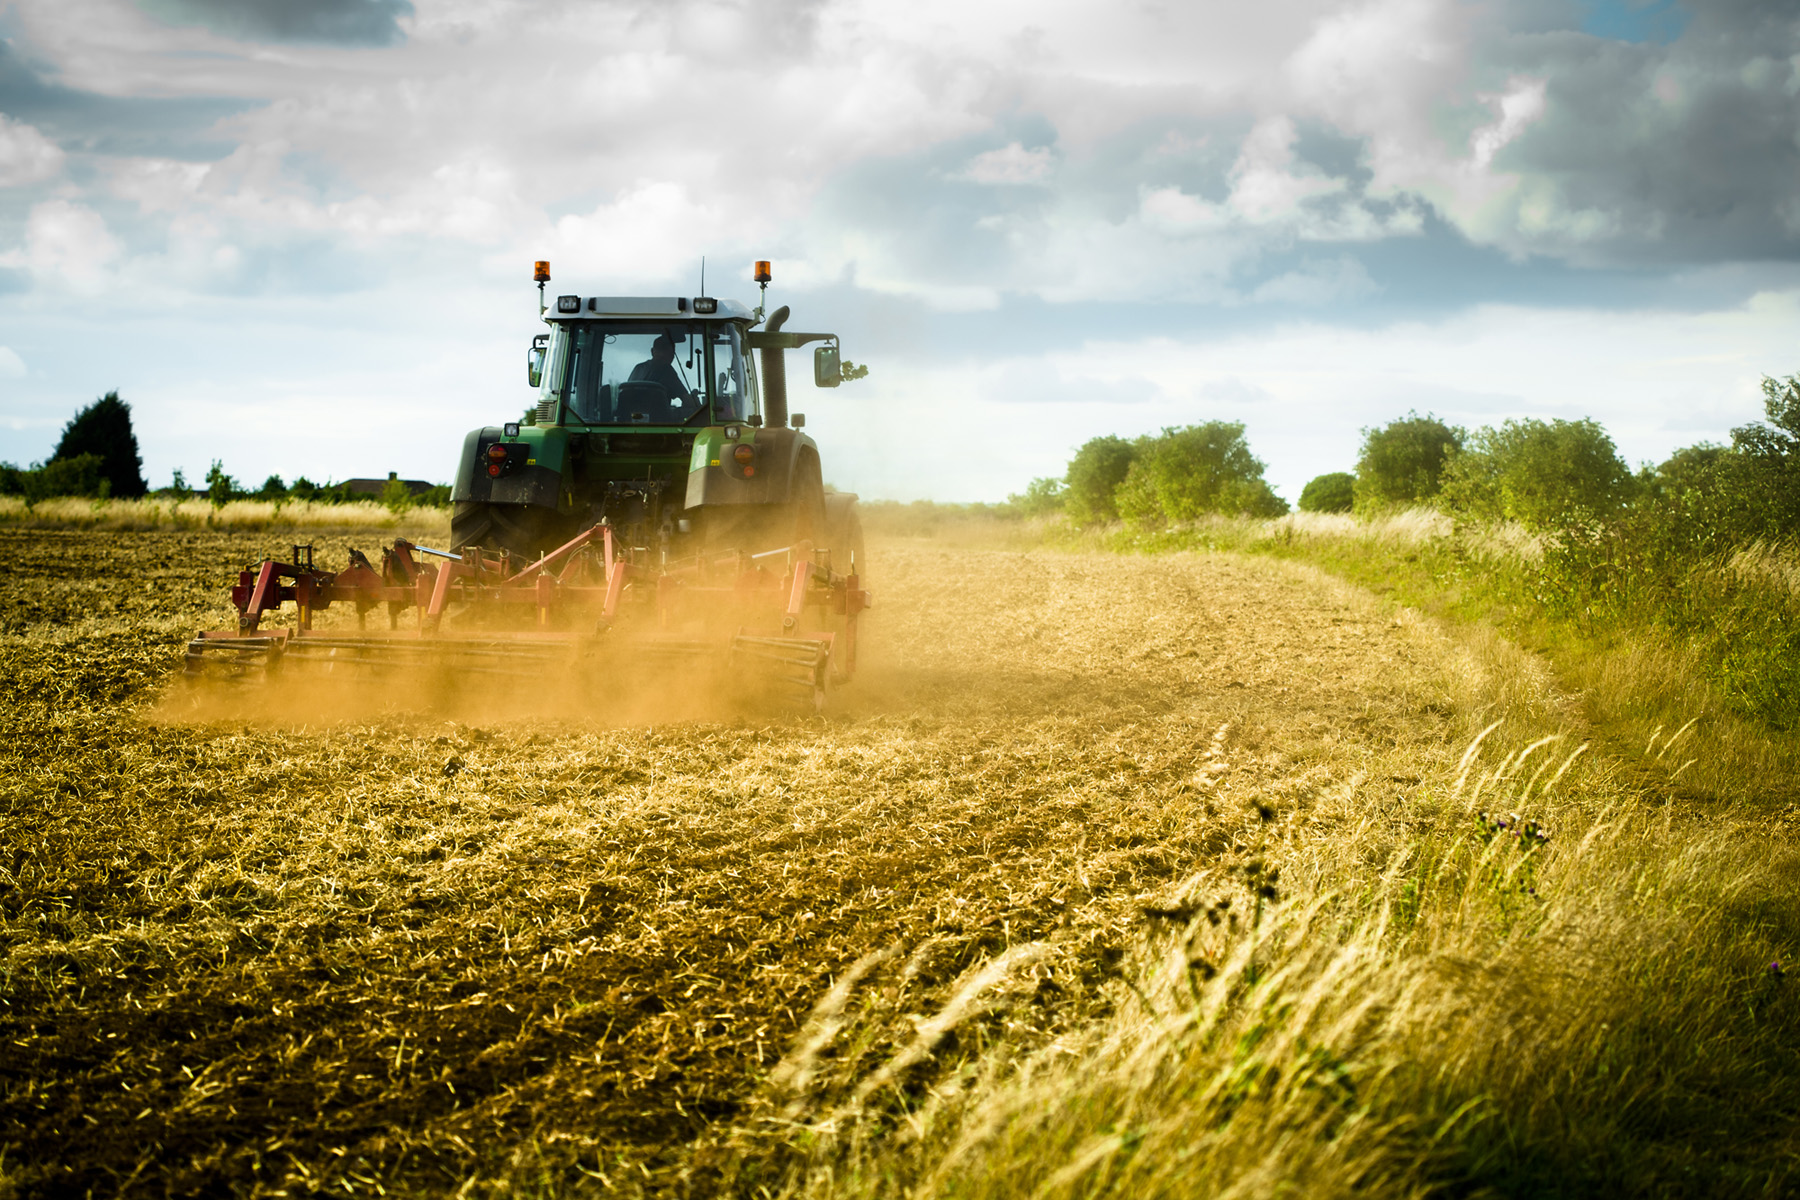 Agriculture has a fatal injury rate which is around 18 times higher than the all-industry rate.